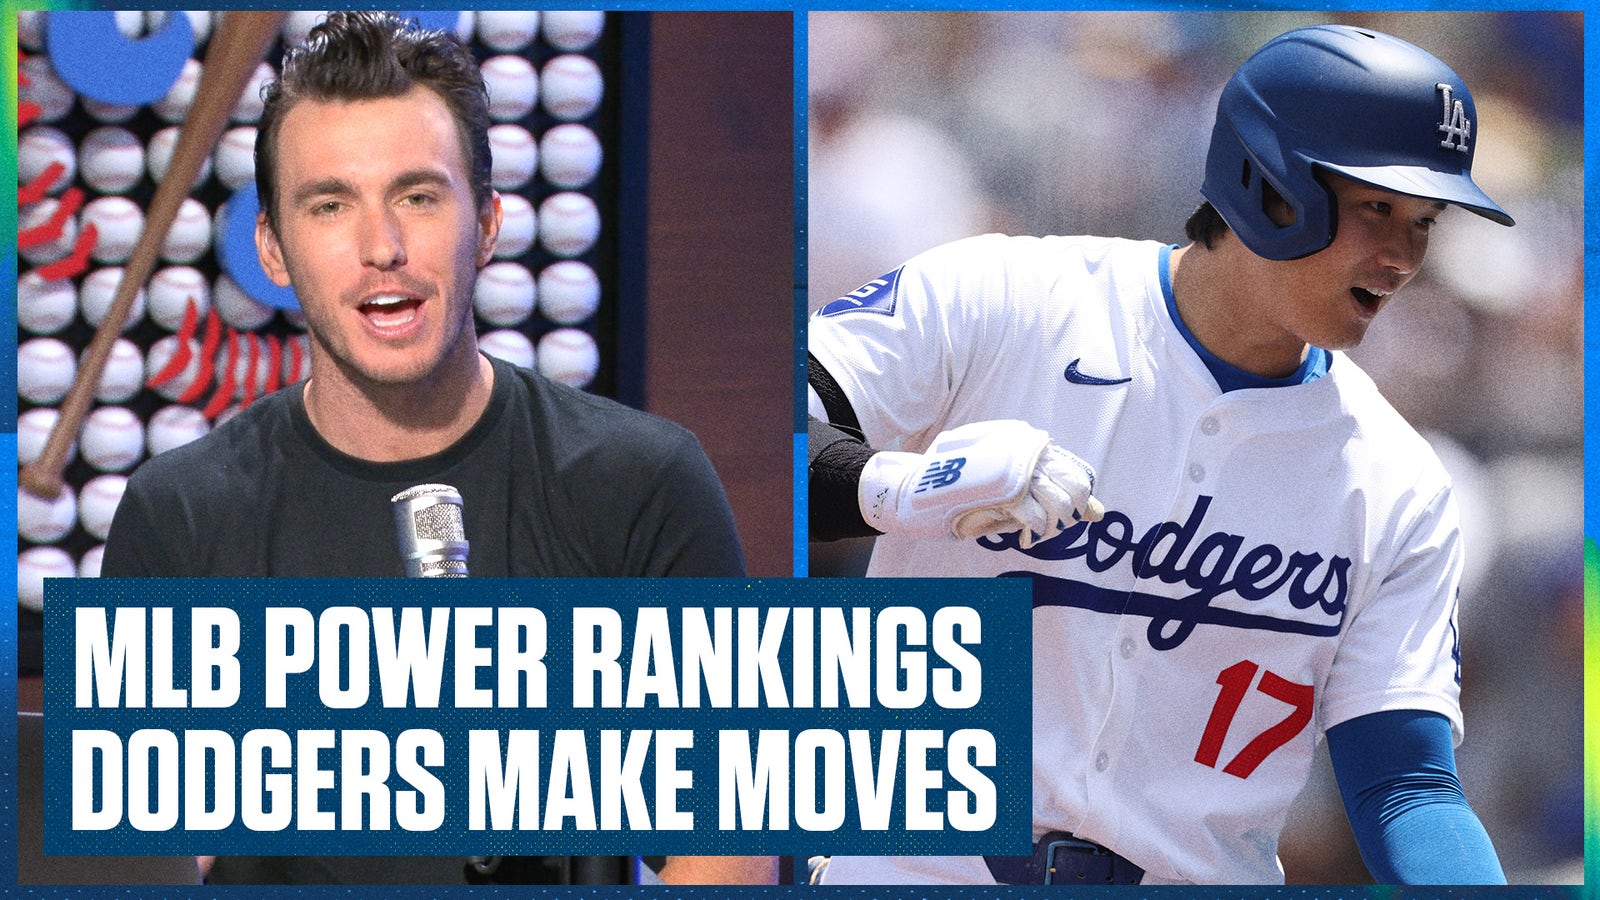 MLB Power Rankings: Where do Cubs, Brewers land after weekend series?